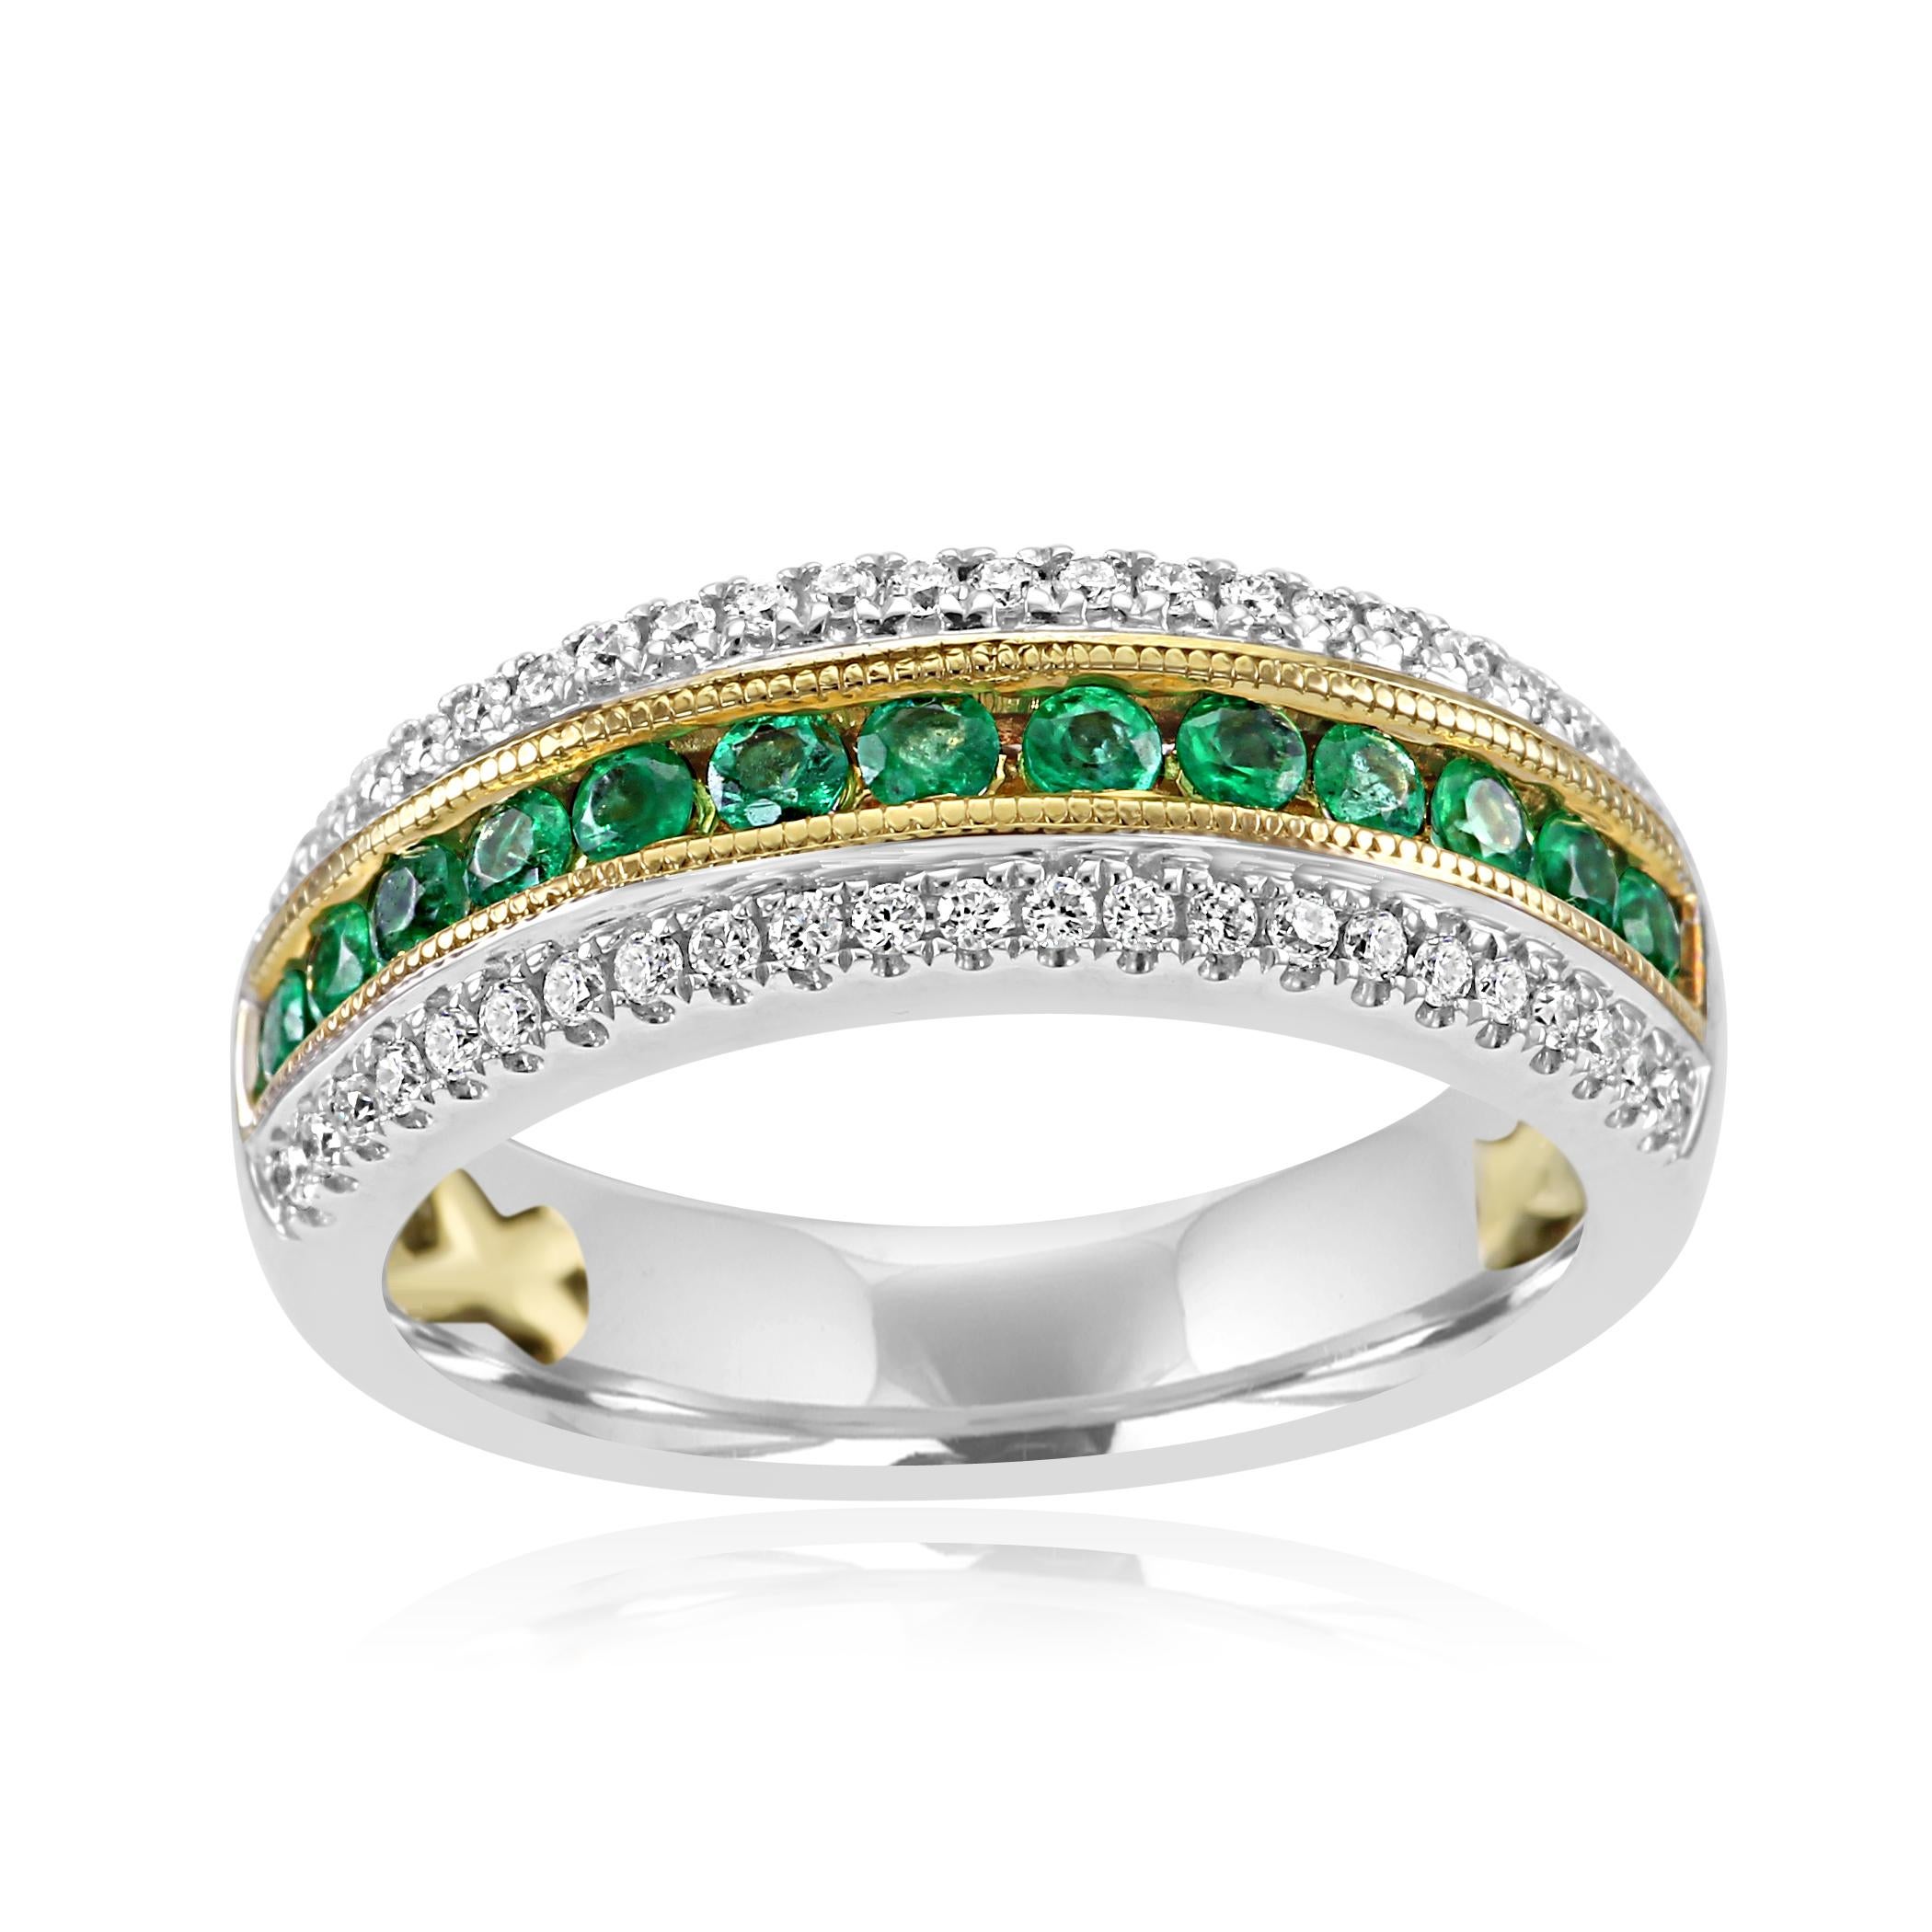 13 Emerald Rounds 0.36 Carat Set in Channel Flanked by Two Row of Diamonds 0.25 Carat in 14K White and Yellow Gold Beautiful Cocktail Fashion Band Ring .

Total Stone Weight  0.61 Carat

Style available in different price ranges and with different